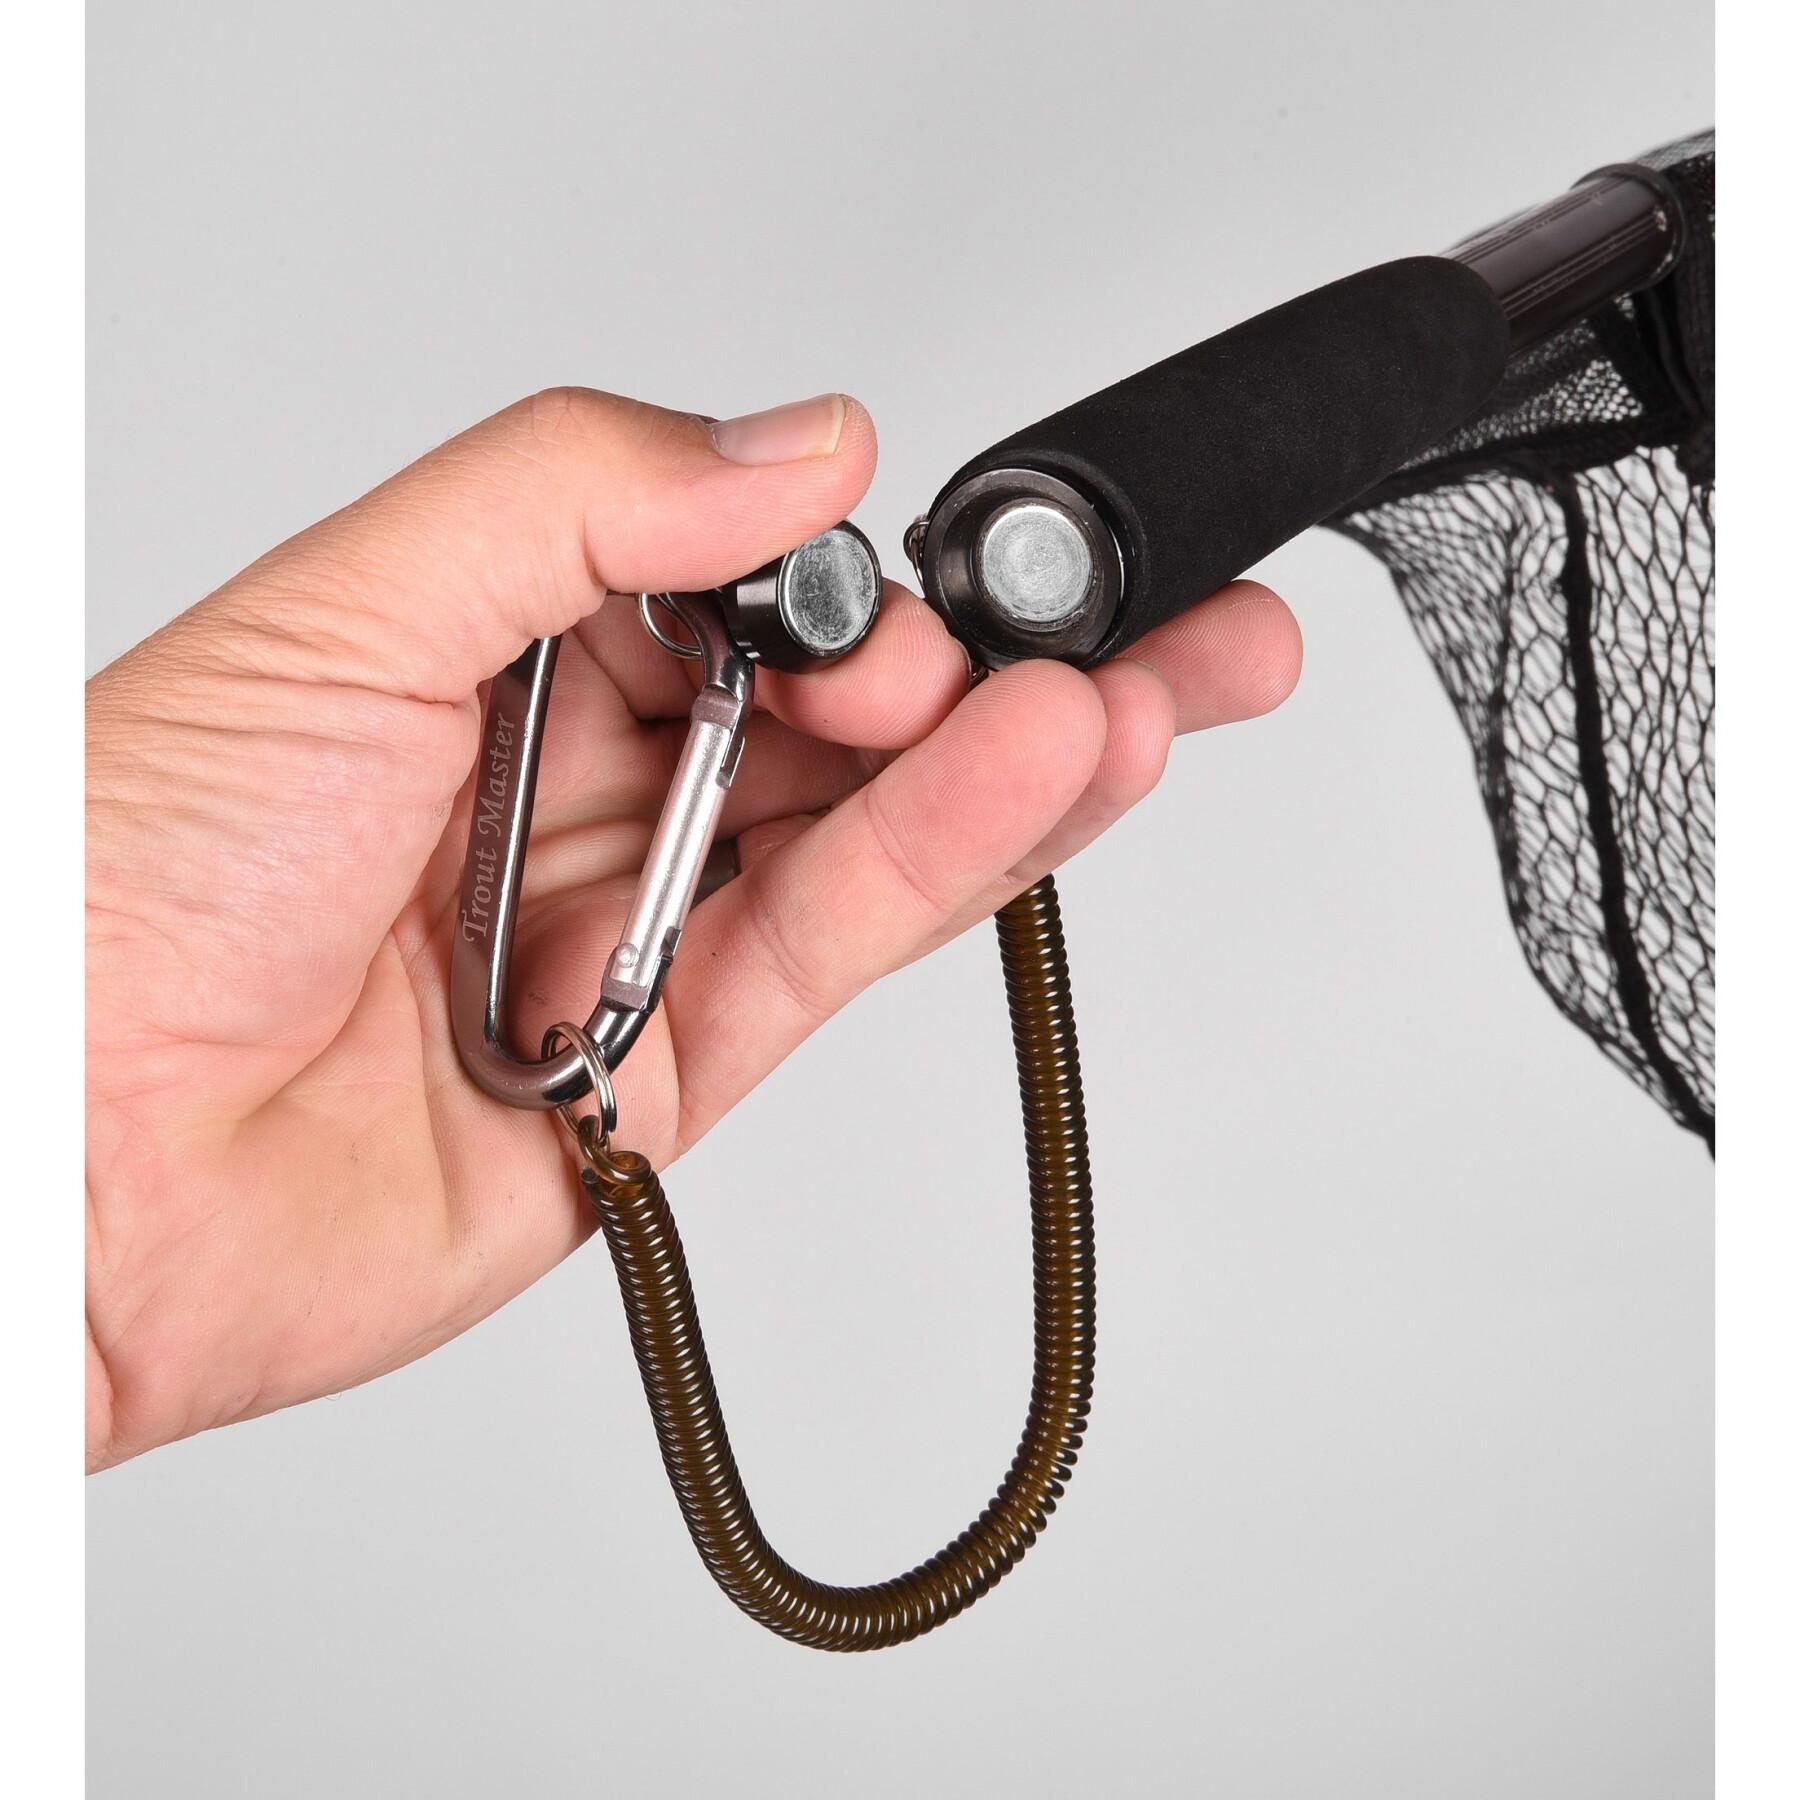 schepnet Spro Trout Master Magnetic Wading